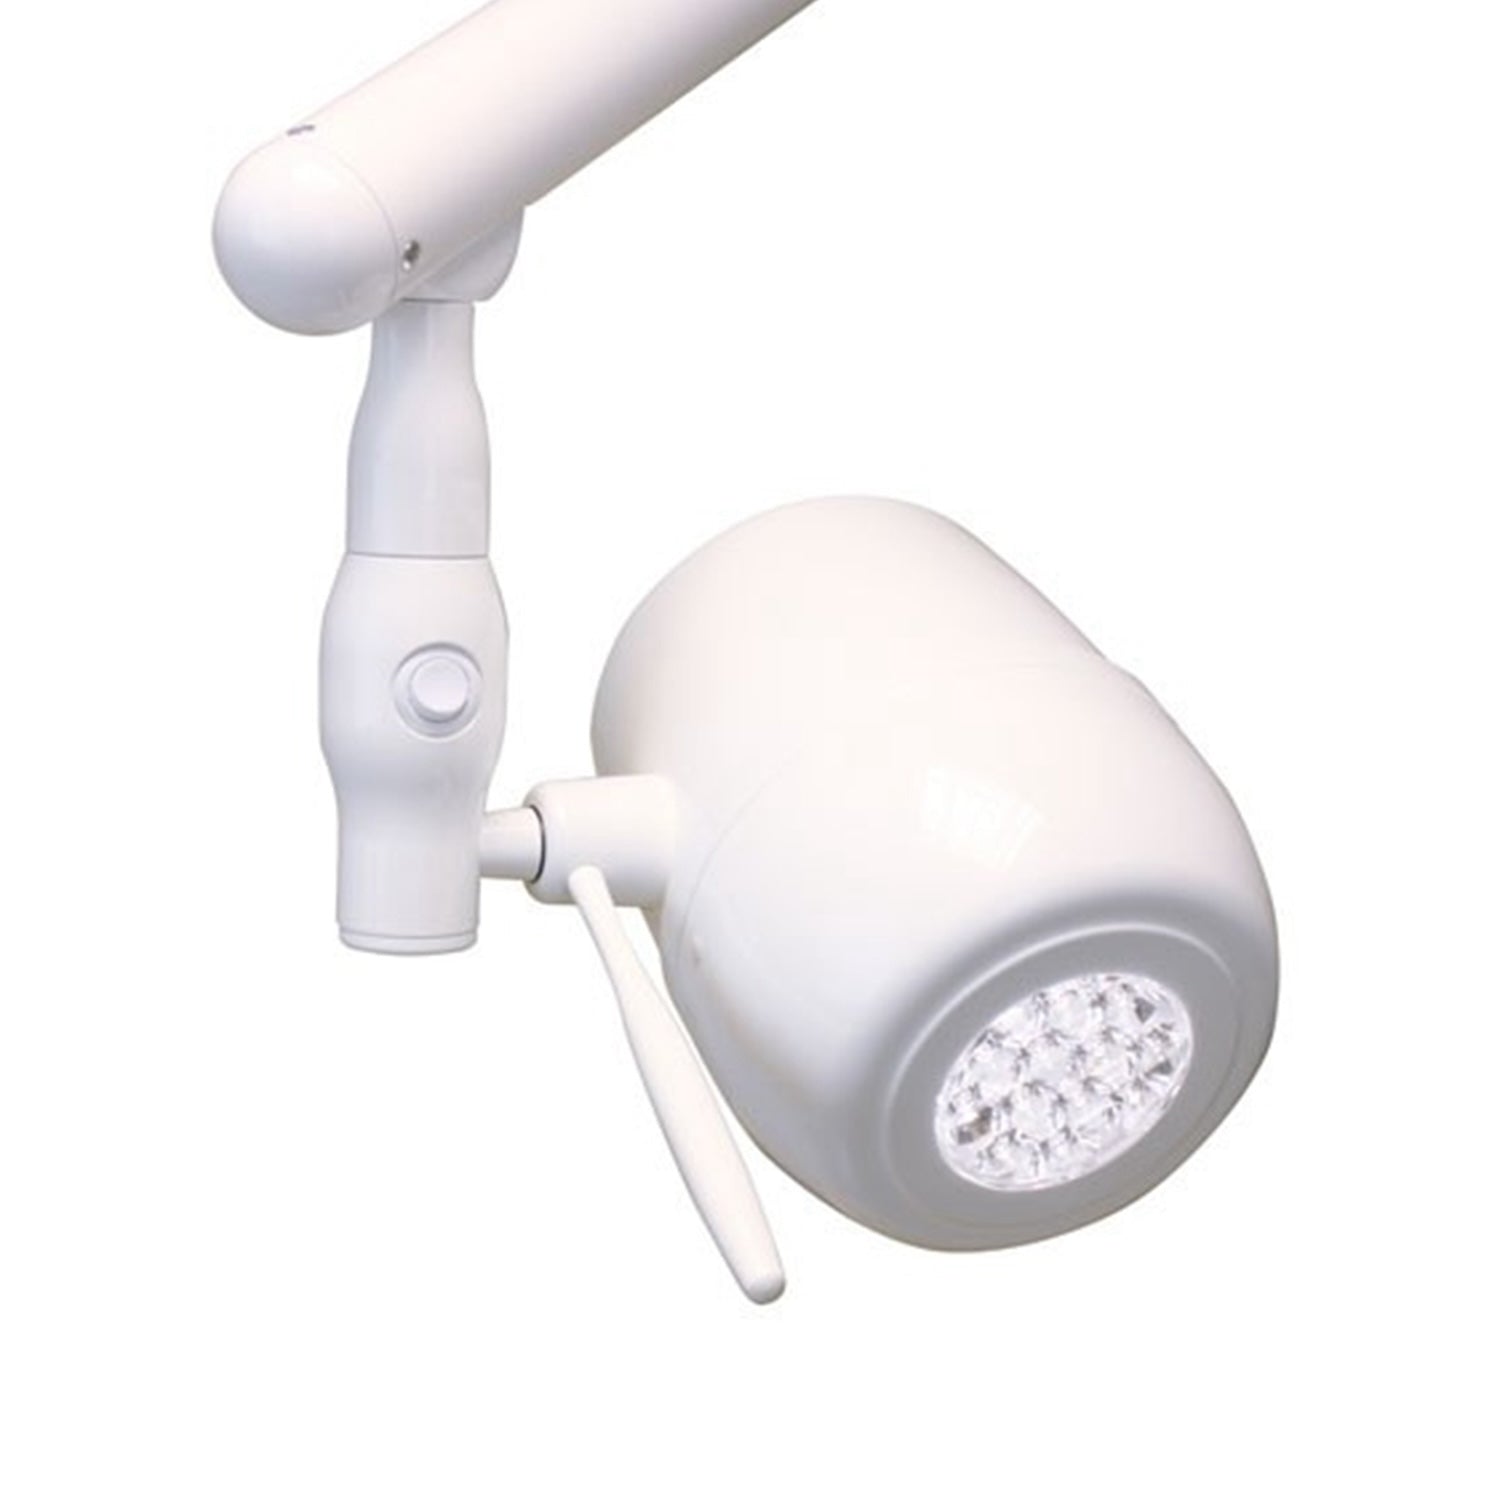 Daray S180 LED Minor Surgical Light